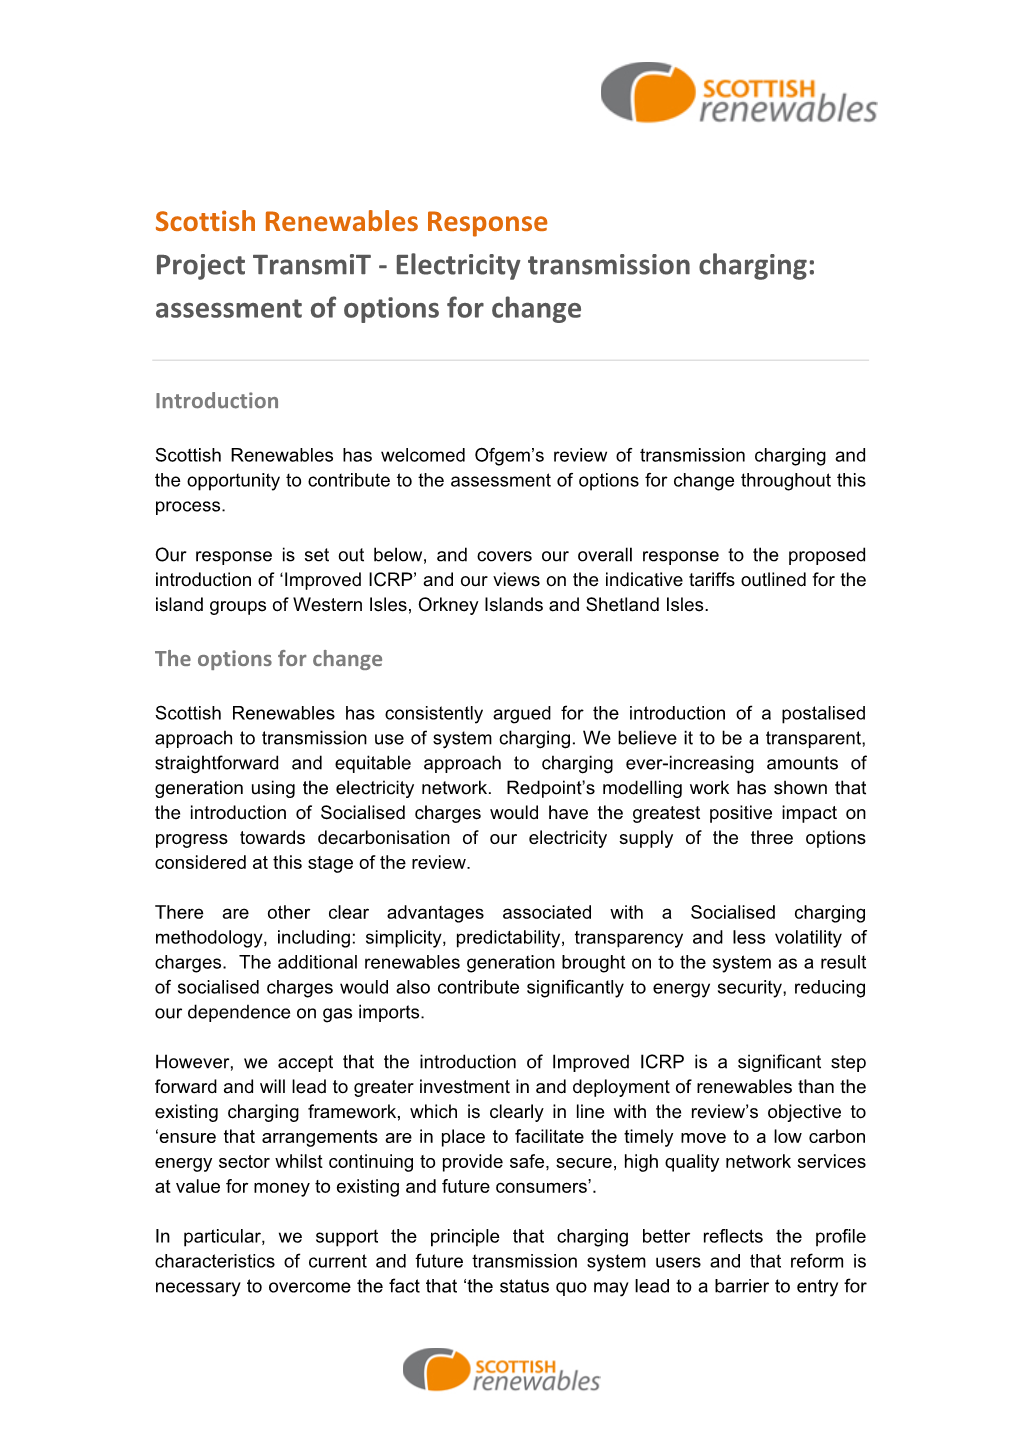 Scottish Renewables Response Project Transmit ‐ Electricity Transmission Charging: Assessment of Options for Change